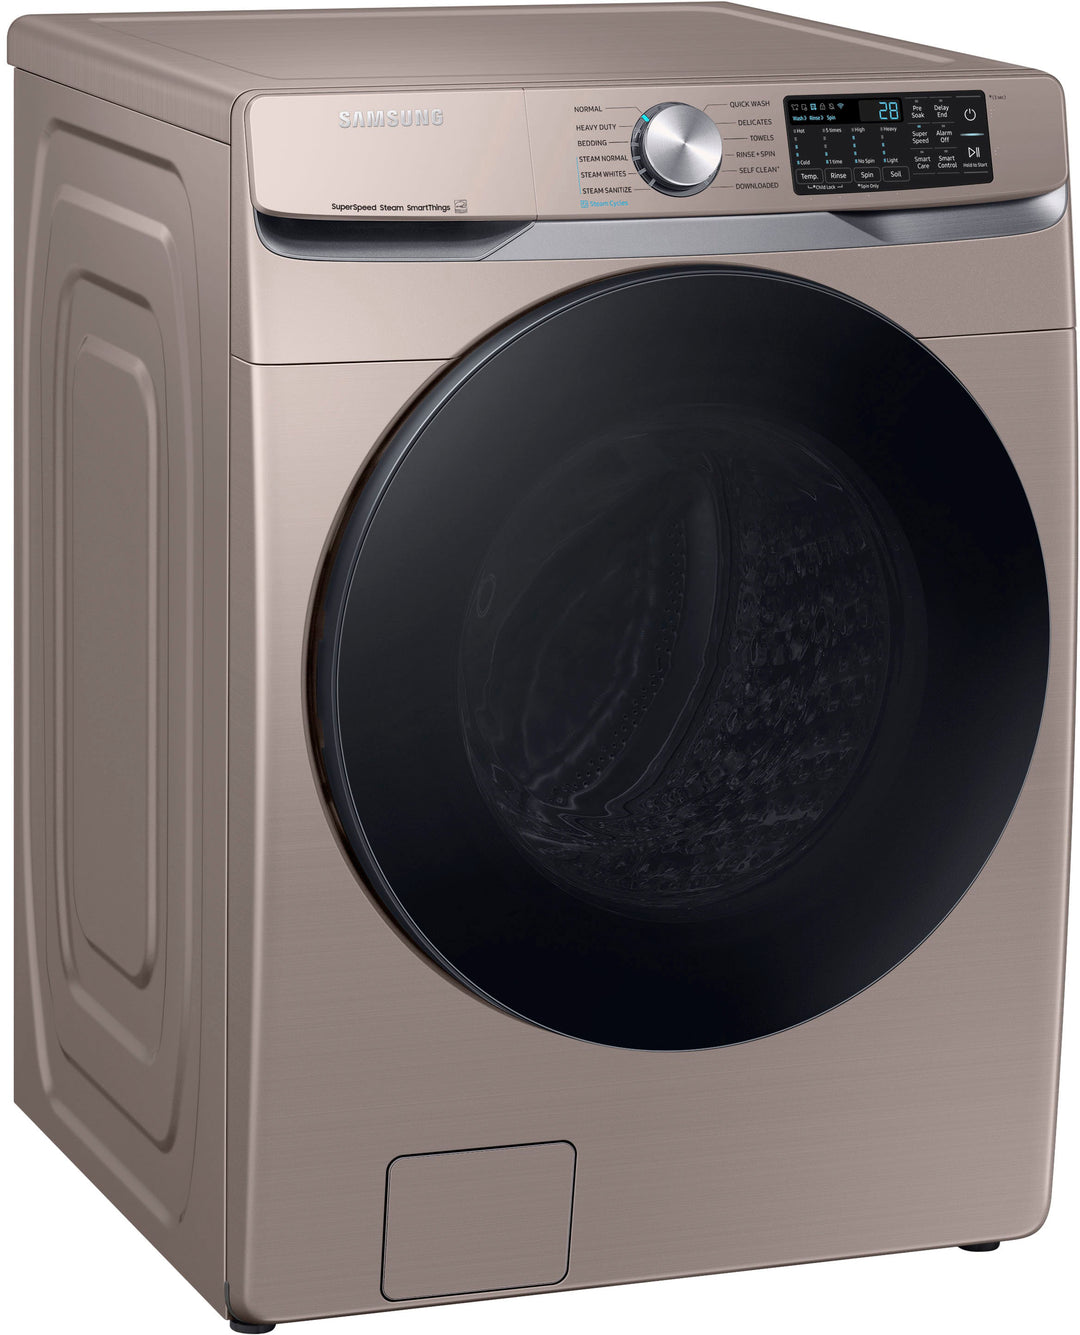 Samsung - 4.5 cu. ft. Large Capacity Smart Front Load Washer with Super Speed Wash - Champagne_4